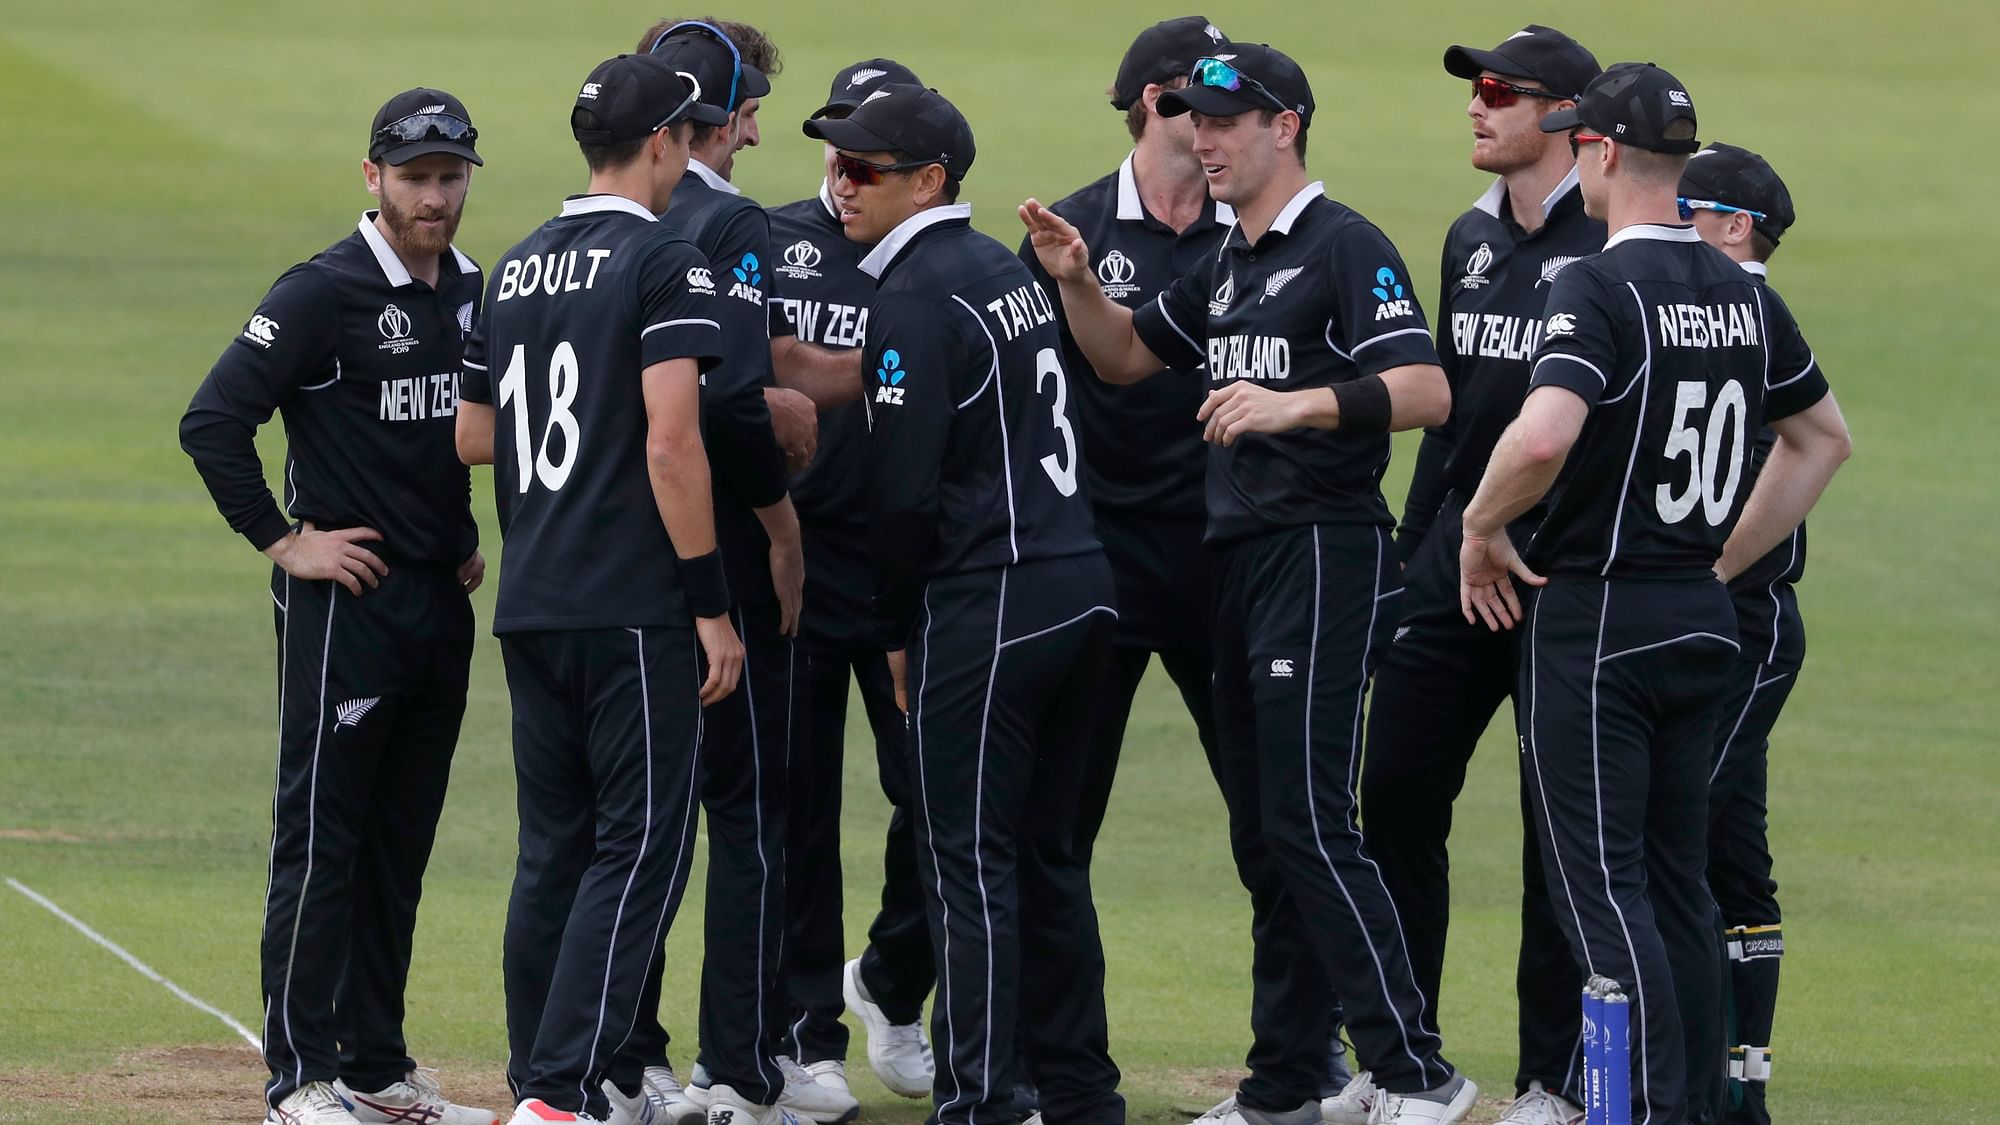 New Zealand lost to England in the World Cup Final on boundary count, a rule that has since been removed.